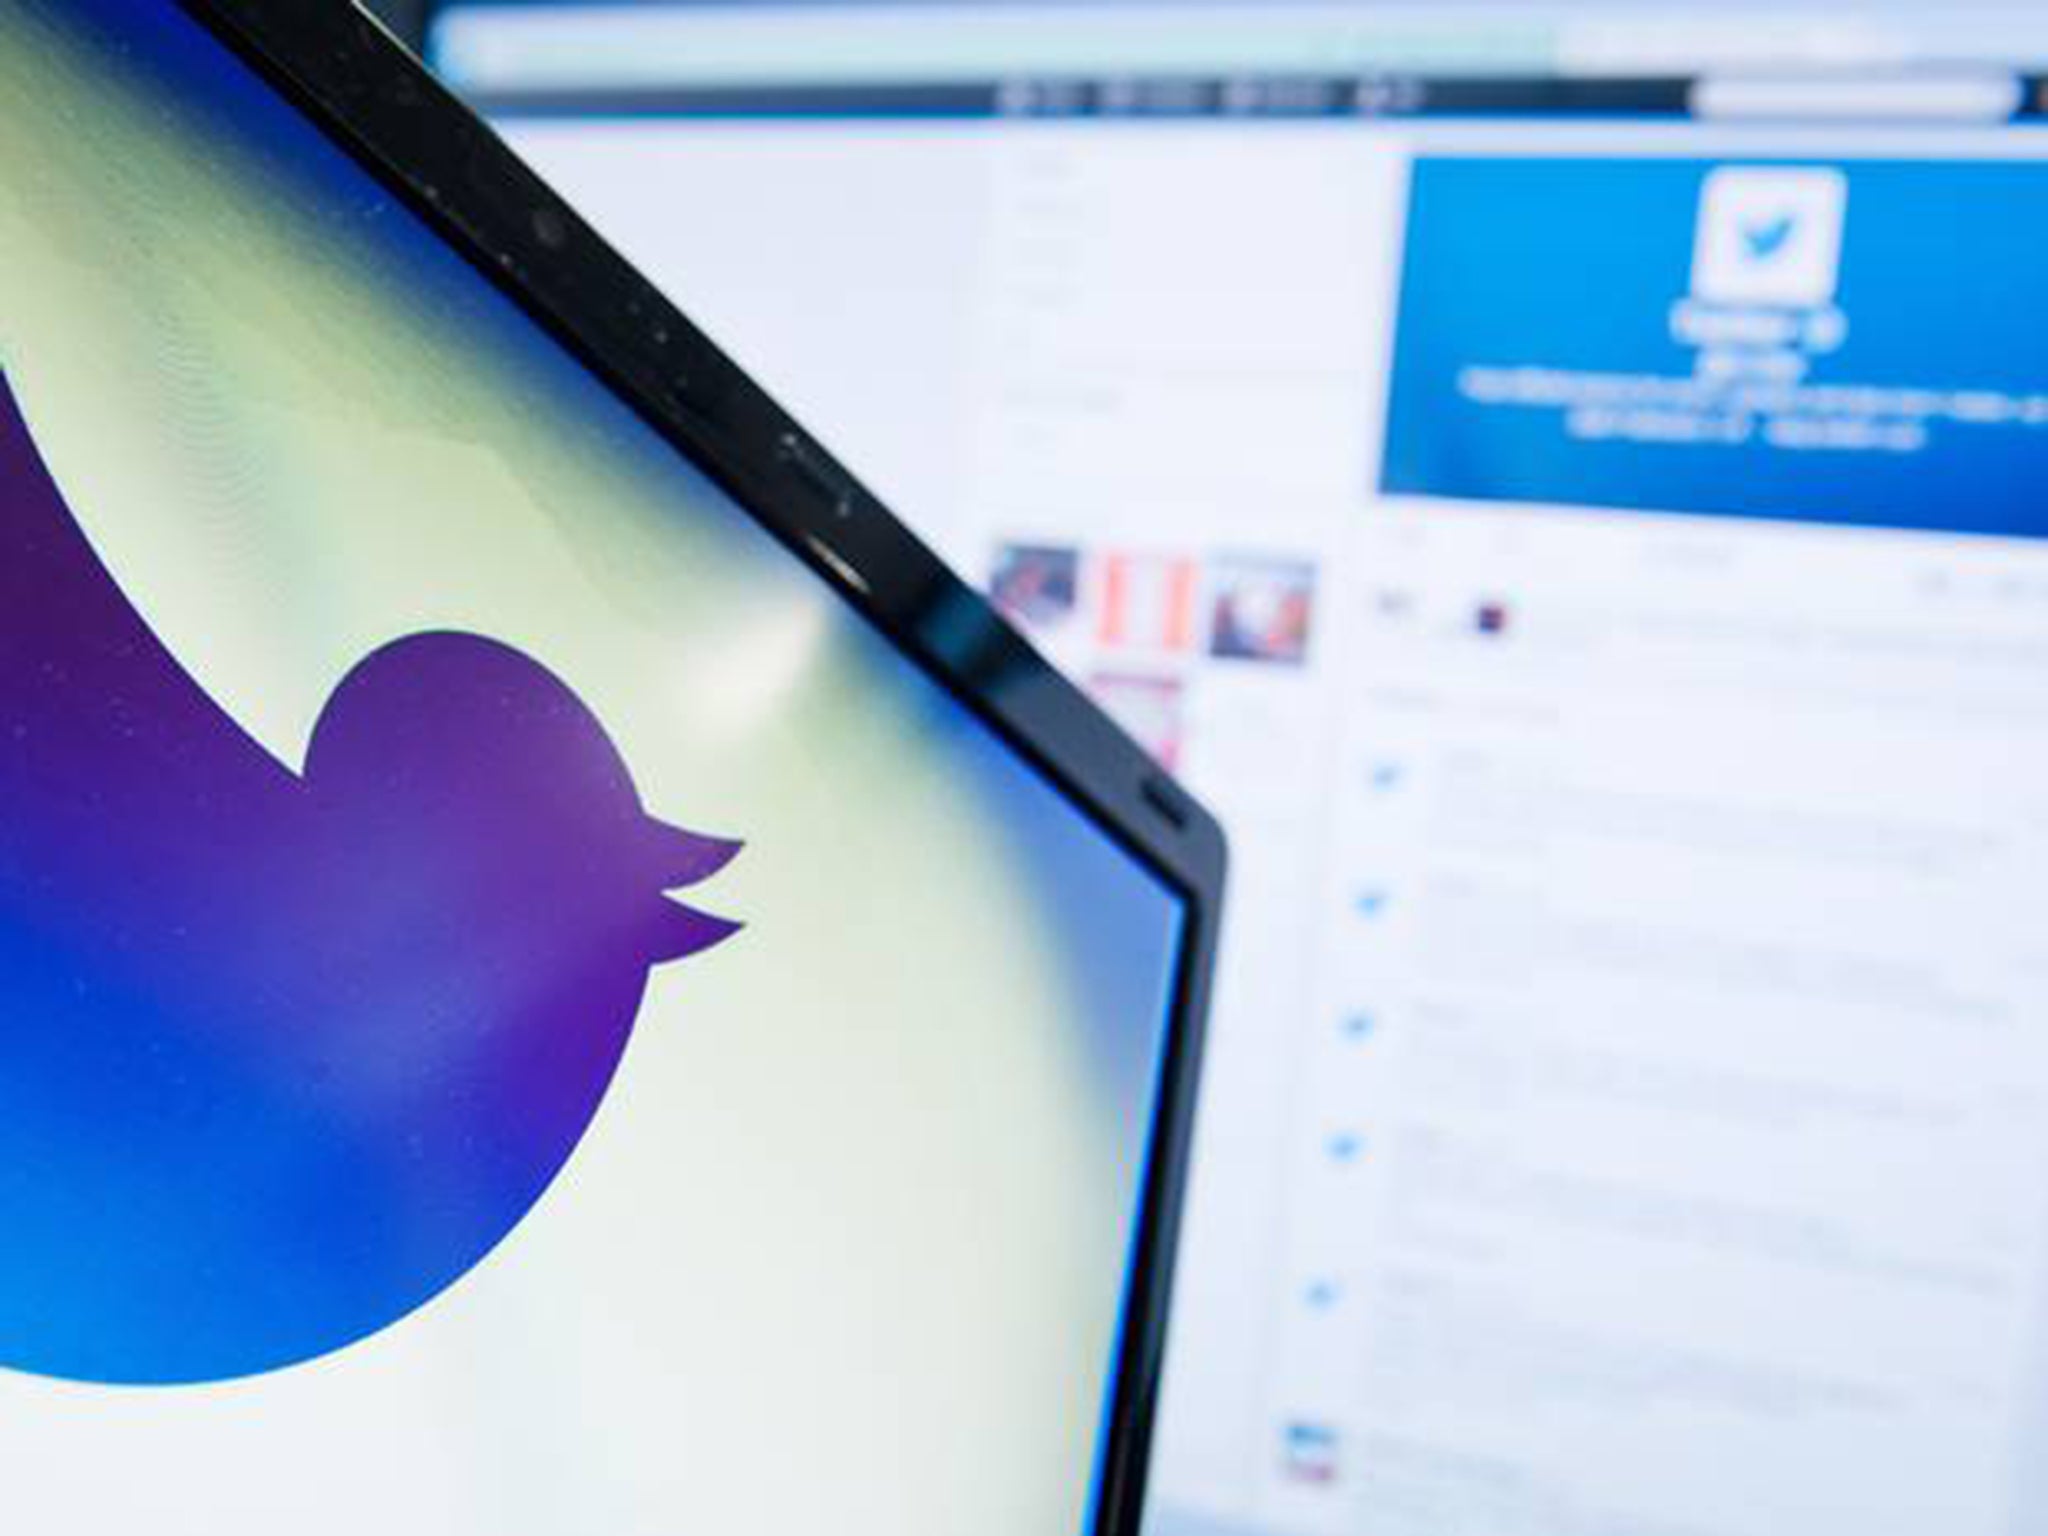 Software engineer Tina Huang has claimed that Twitter’s informal promotion process unfairly favours its male employees